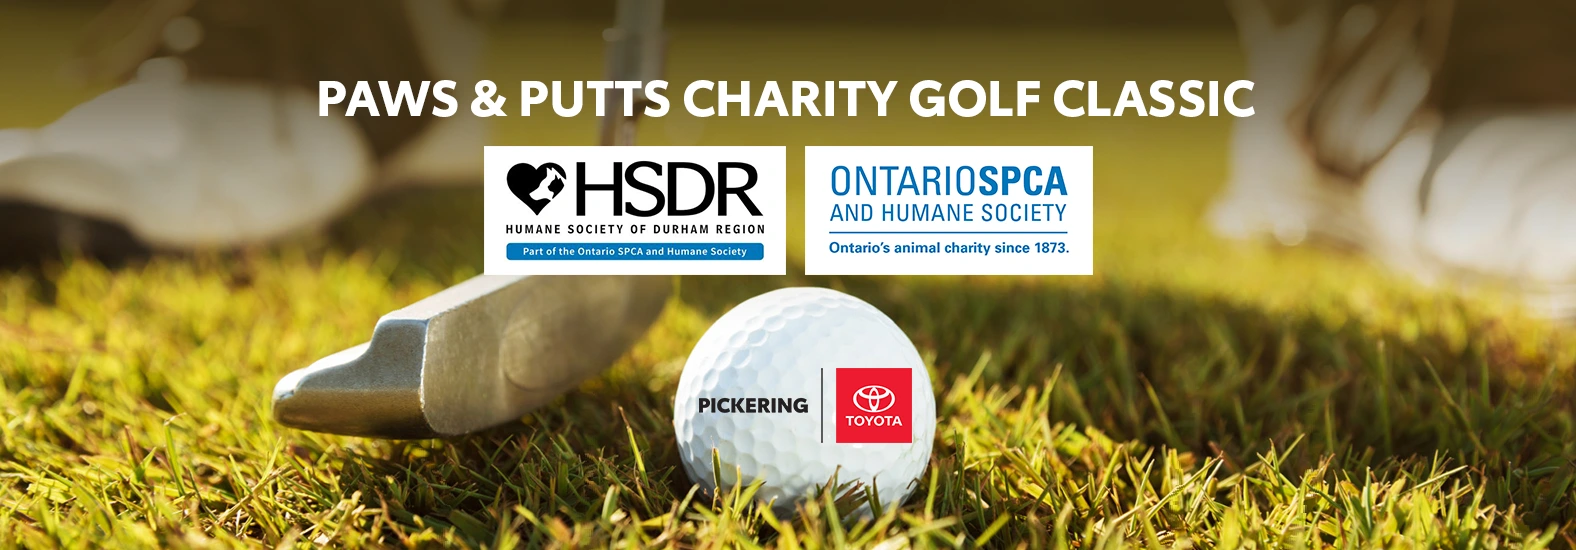 Join Us for the Paws & Putts Charity Golf Classic: A Day of Golfing Fun for a Pawsome Cause